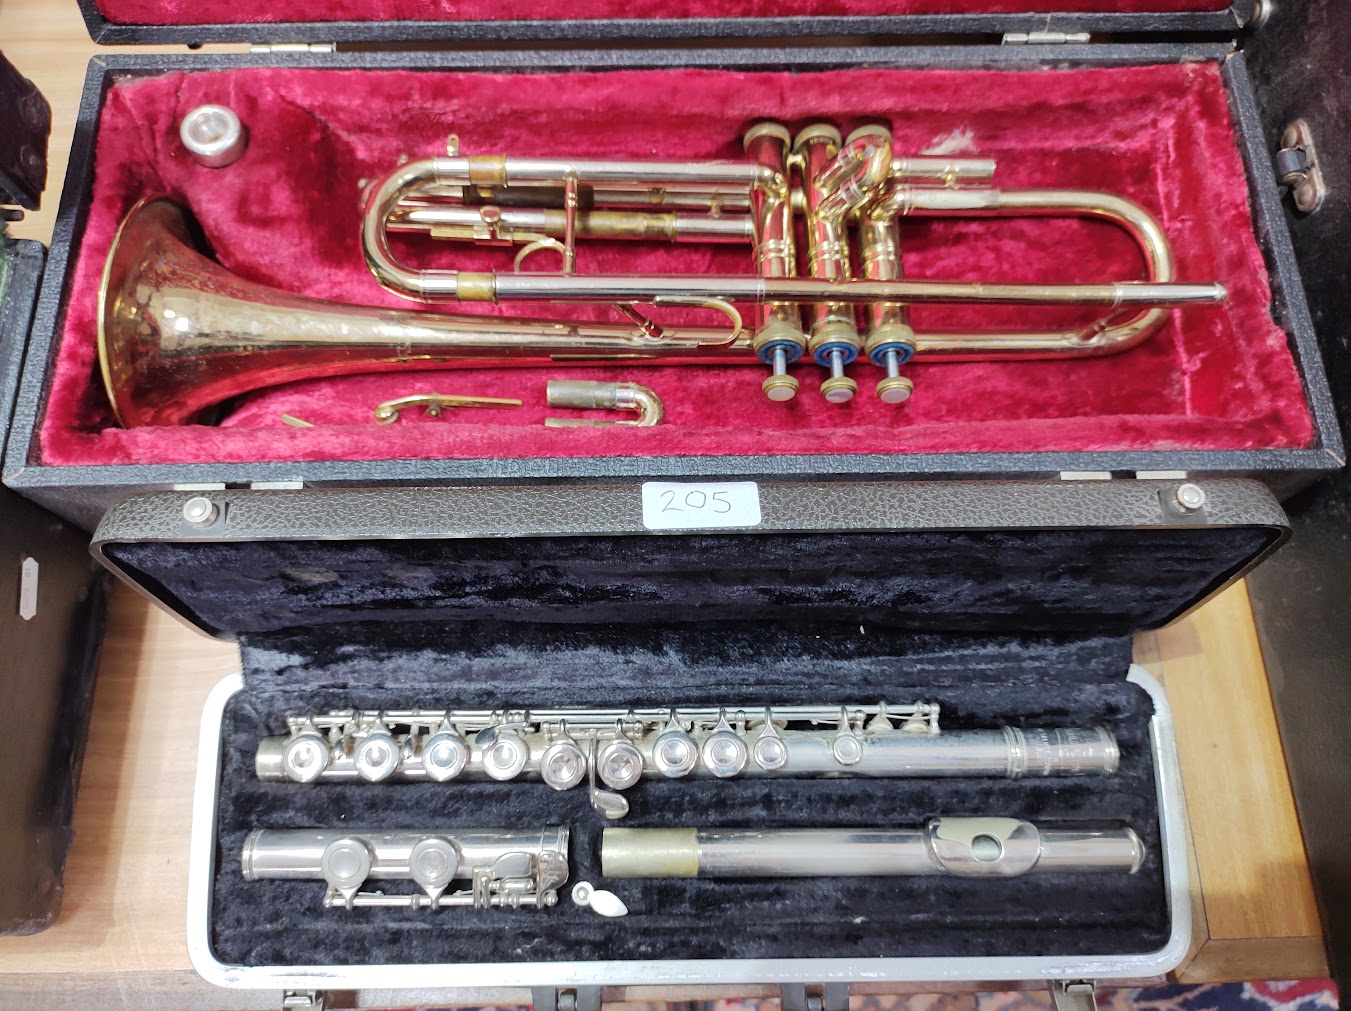 A York trumpet, serial no.590302 and a Bundy flute, serial no.545213, both with hard cases.